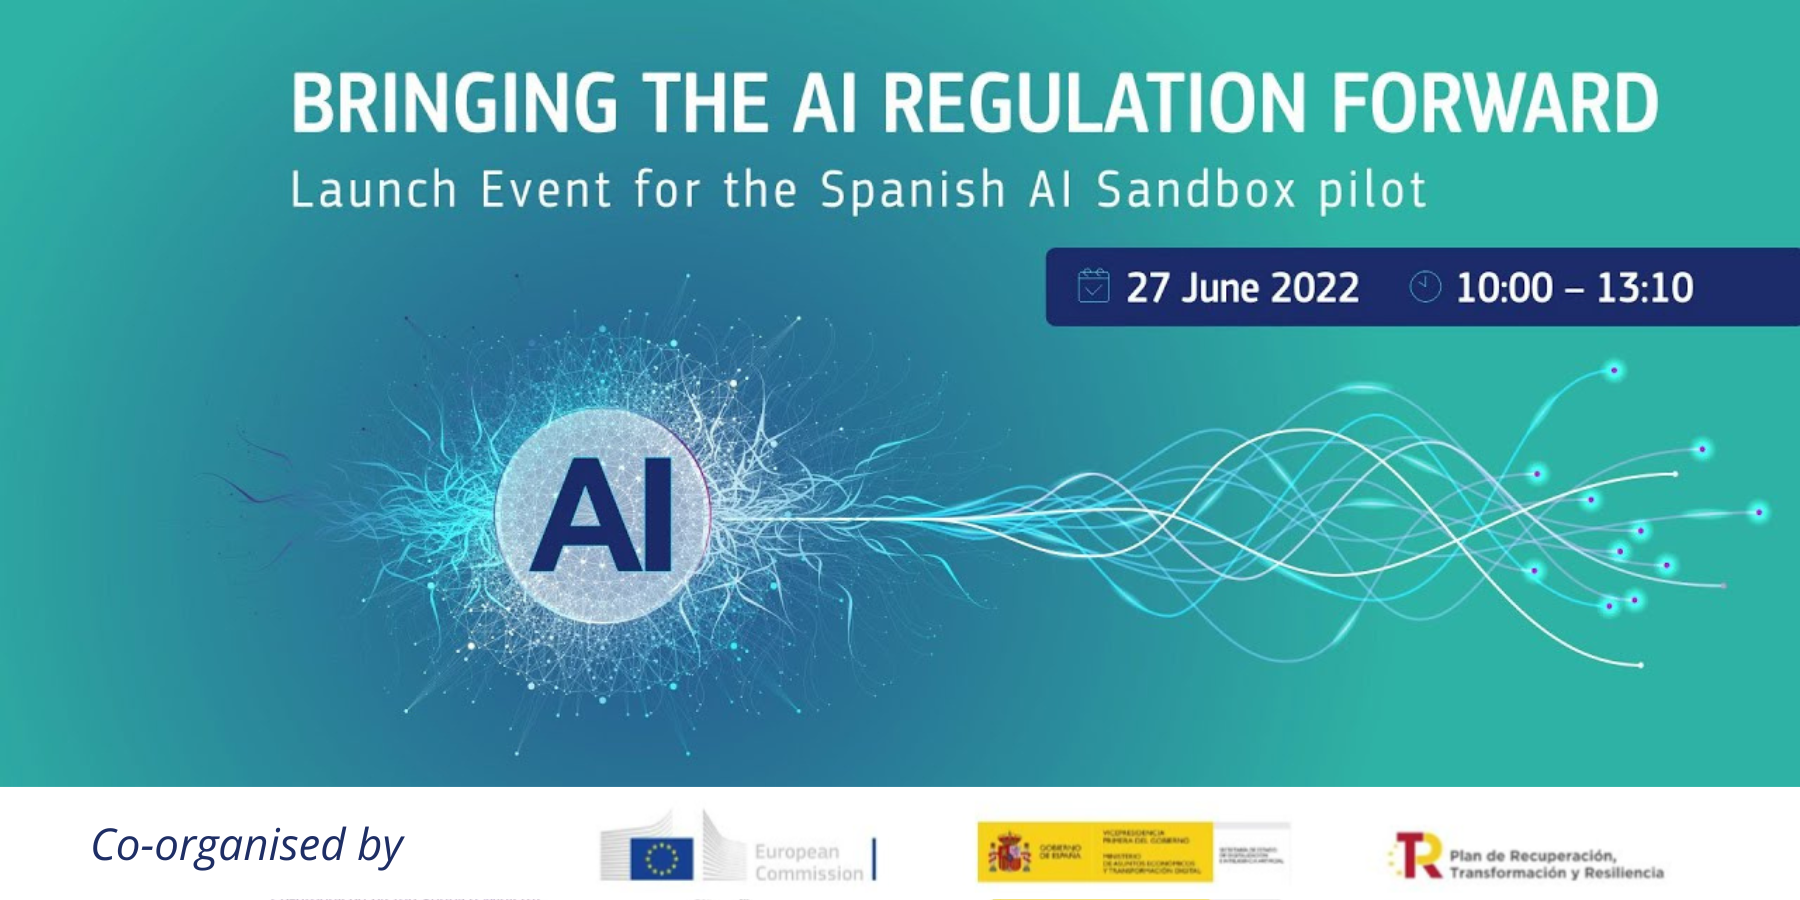 Launch event for the Spanish Regulatory Sandbox on Artificial Intelligence